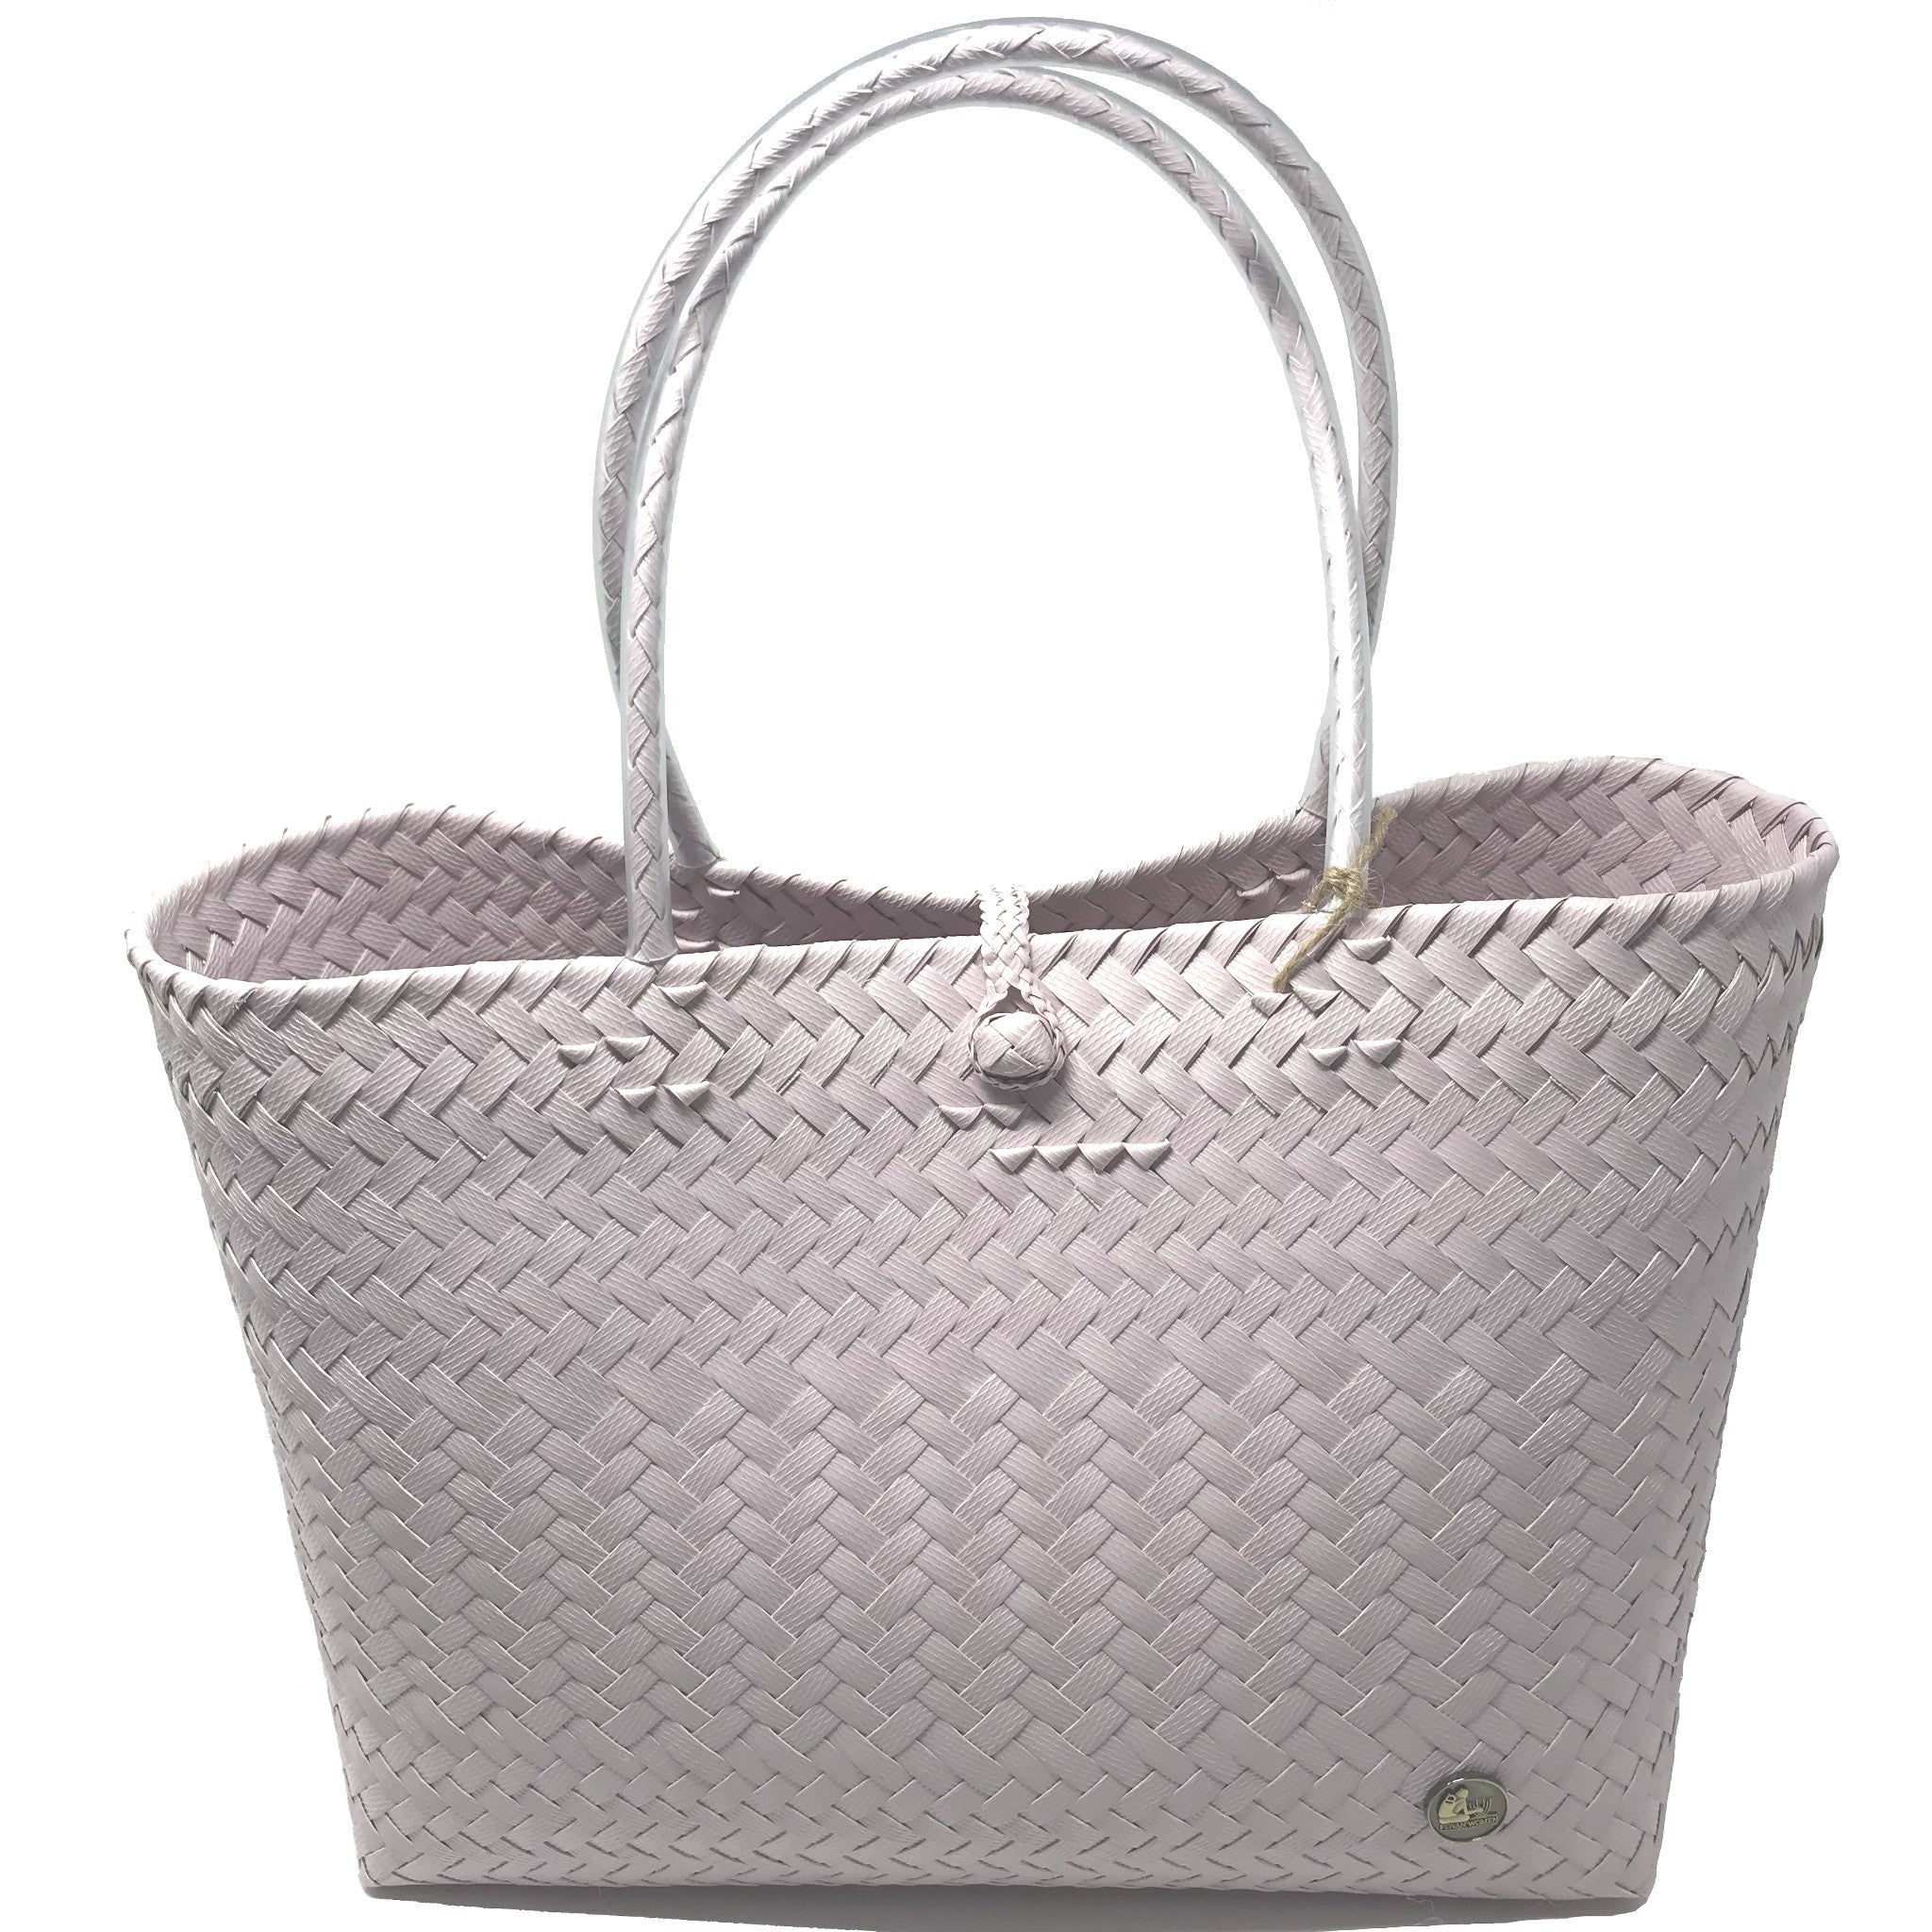 Lilac medium size tote bag facing the front.